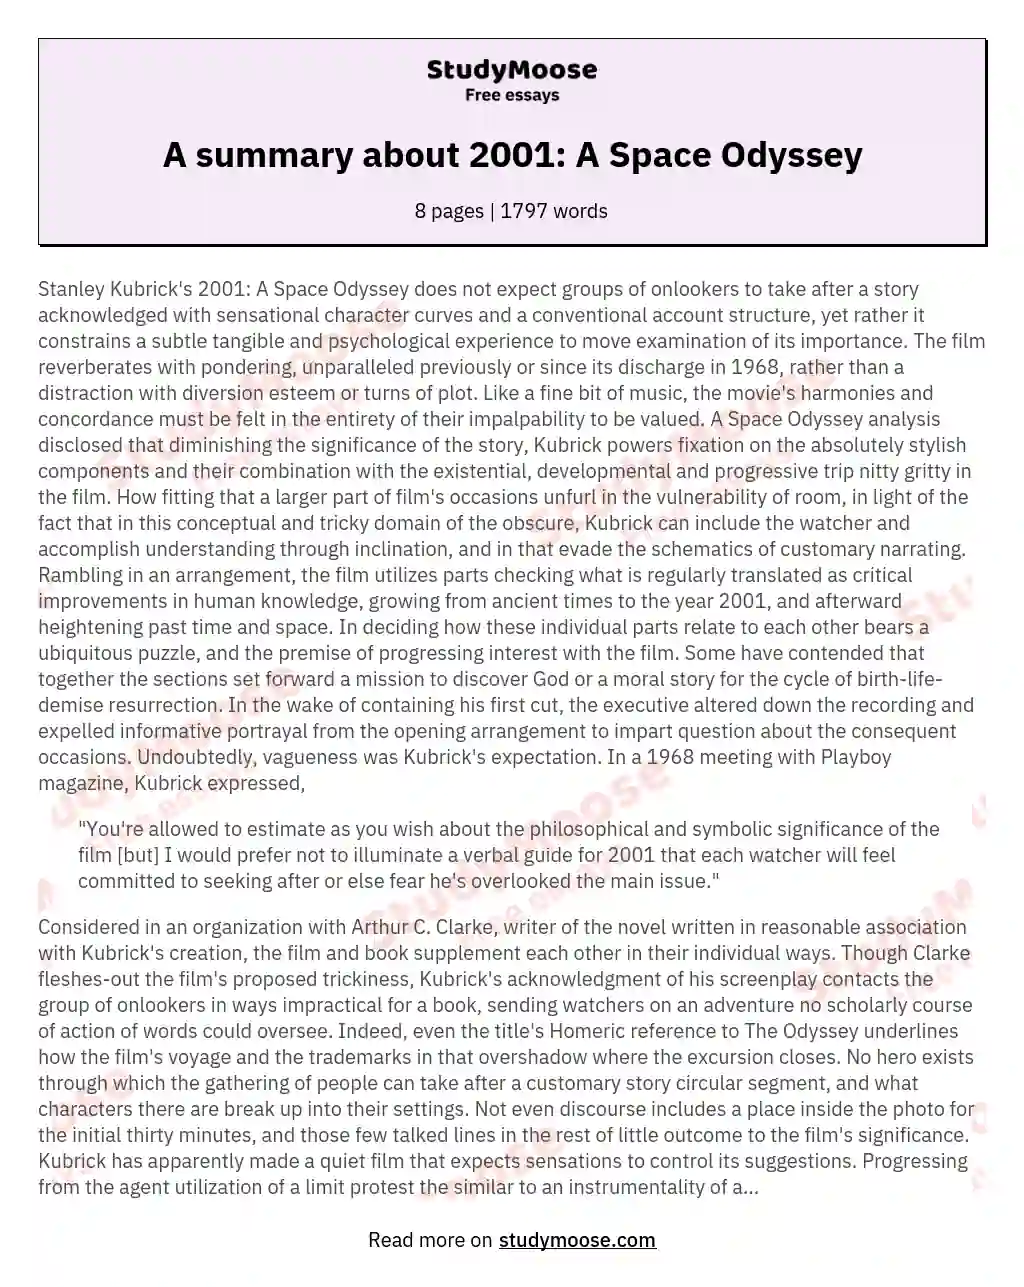 A summary about 2001: A Space Odyssey essay